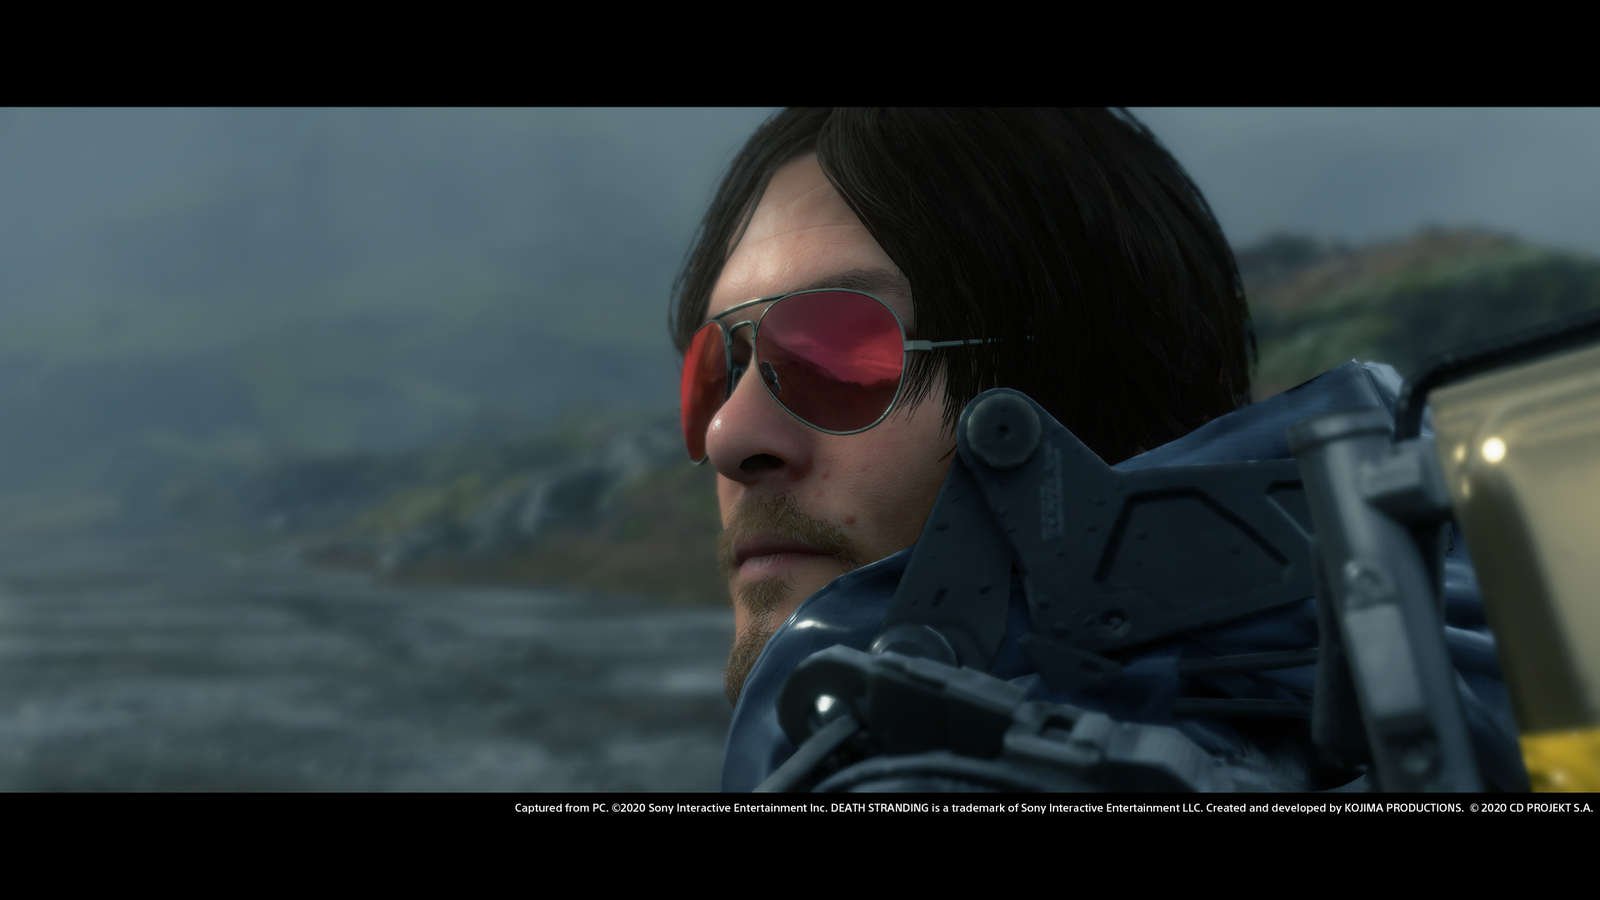 Kojima Productions currently working with PlayStation marketing team